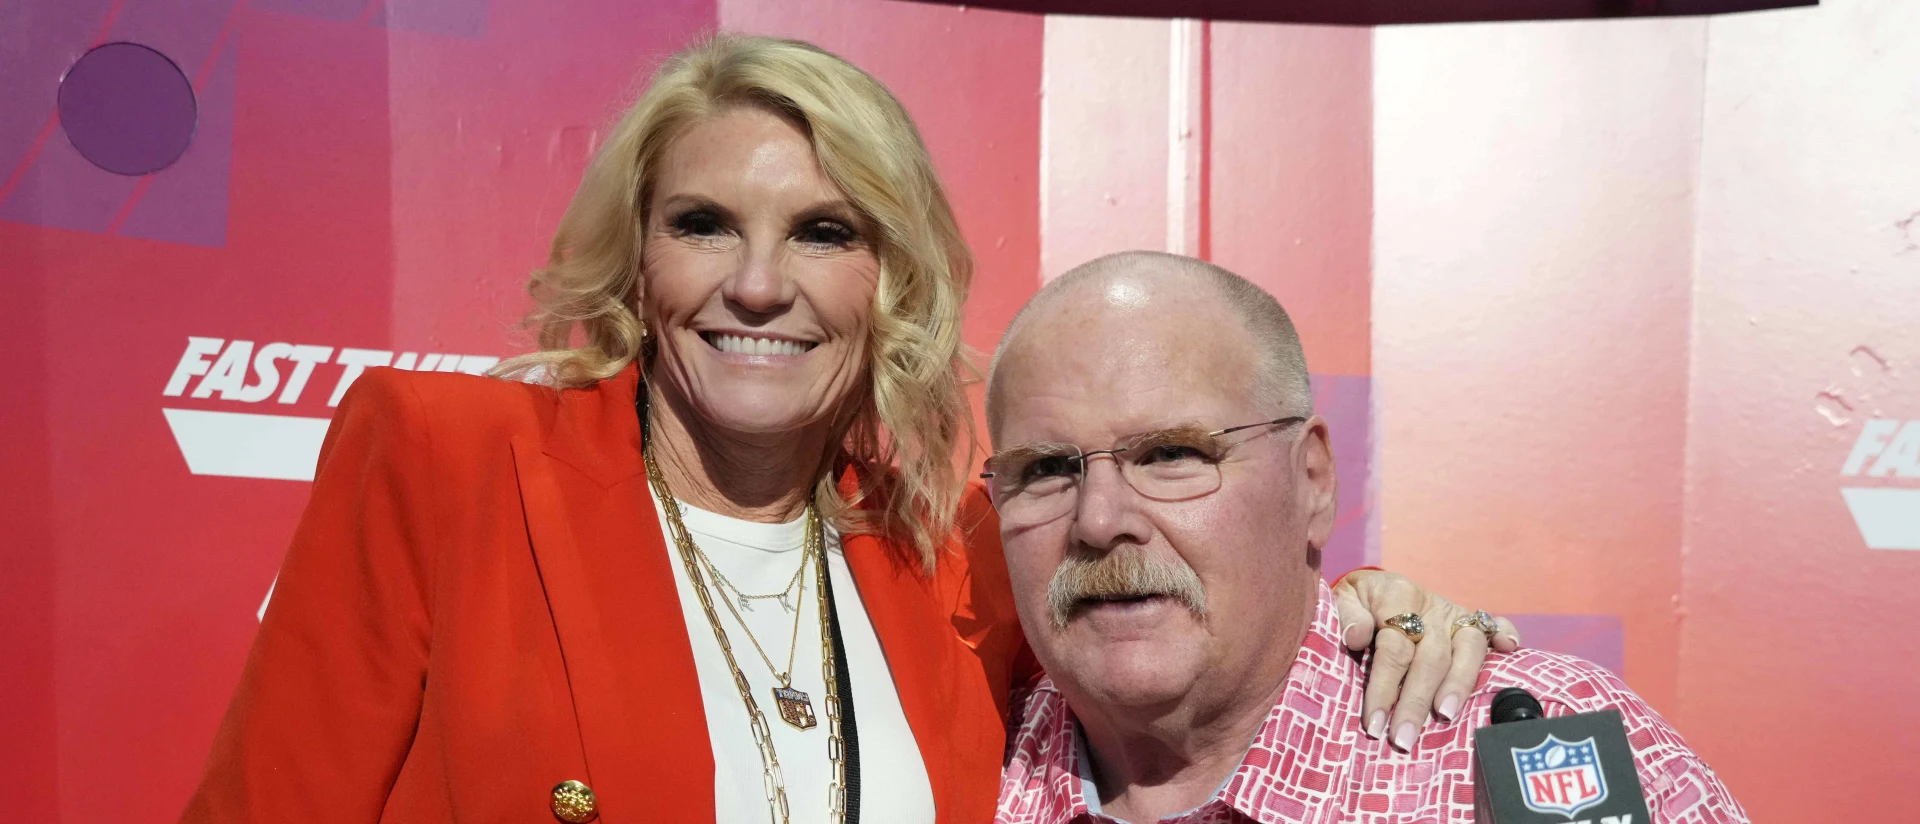 It doesn't get better than that: TV director's NFL fandom landed Kansas City Chiefs Head Coach Andy Reid's wife Tammy a sweet cameo